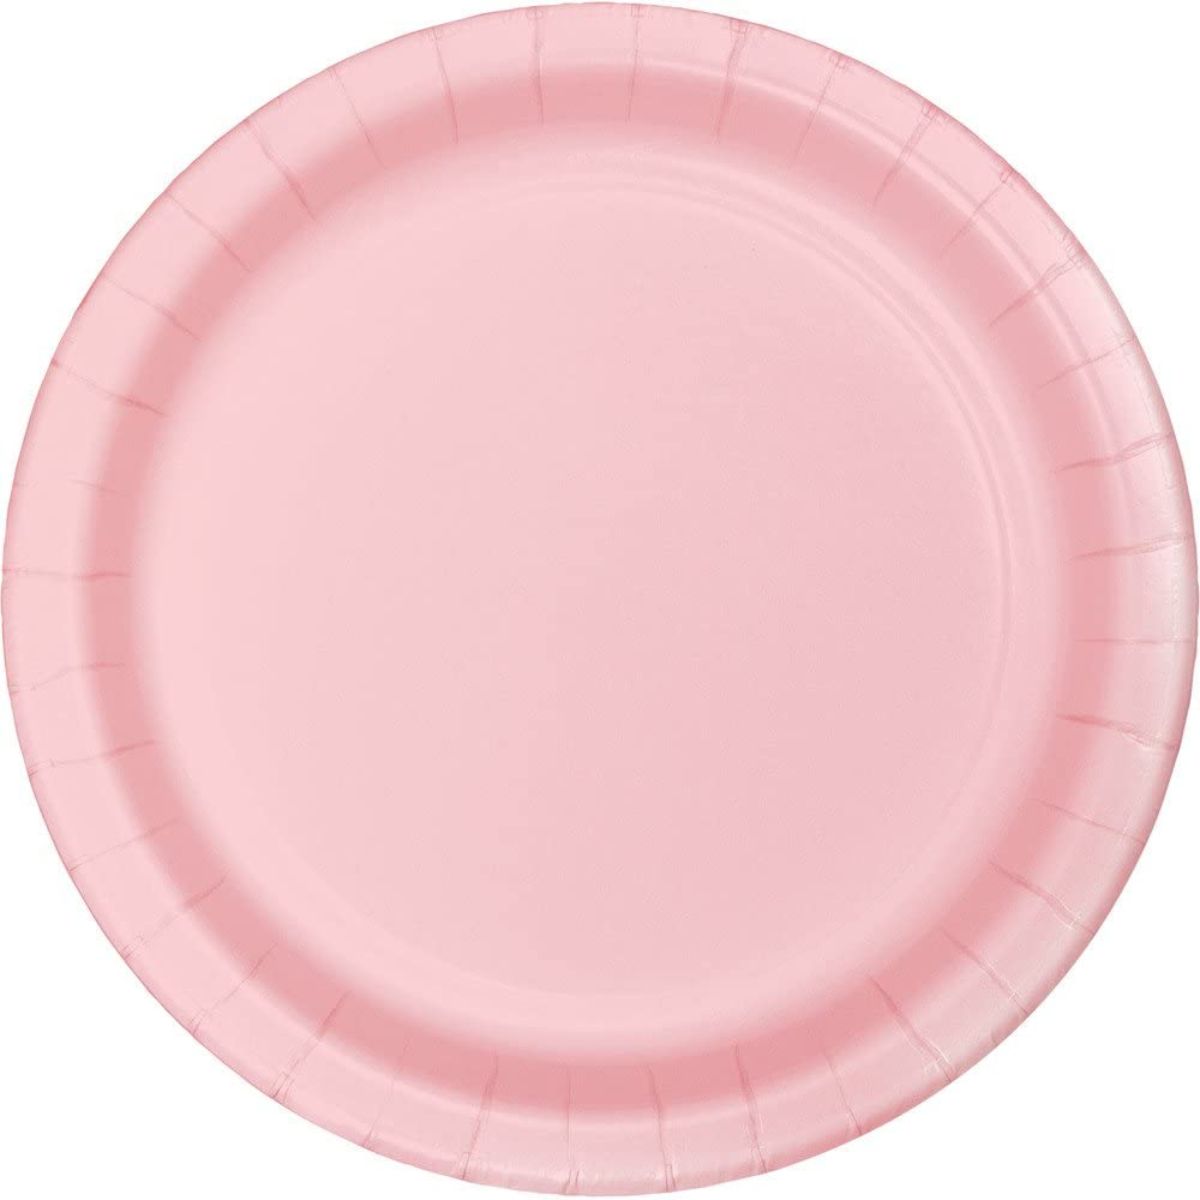 Creative Converting Dinner 8.75" Paper Plates 24ct